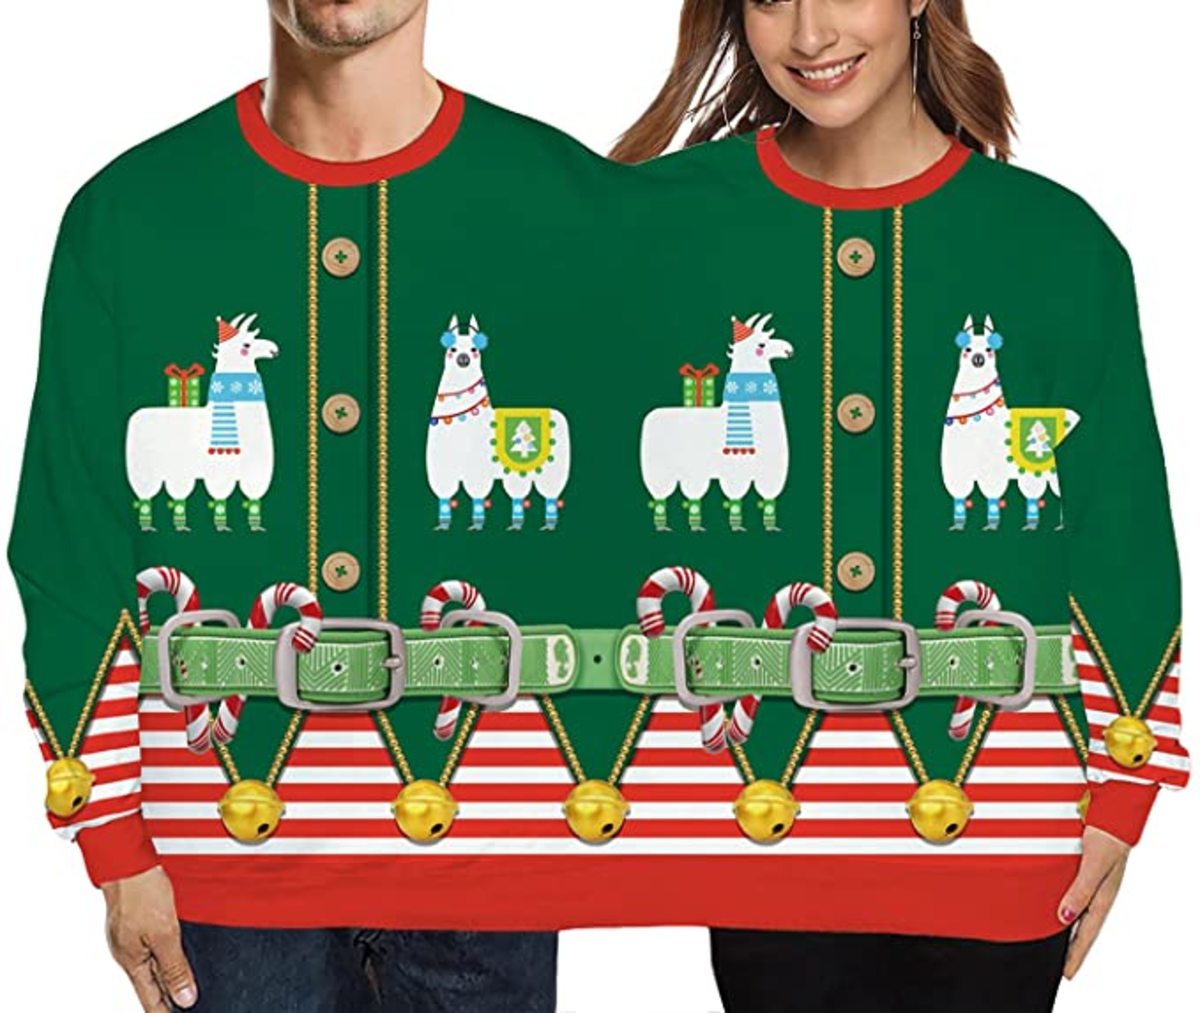 Ugly Christmas Sweater Day Is December 17, 2021